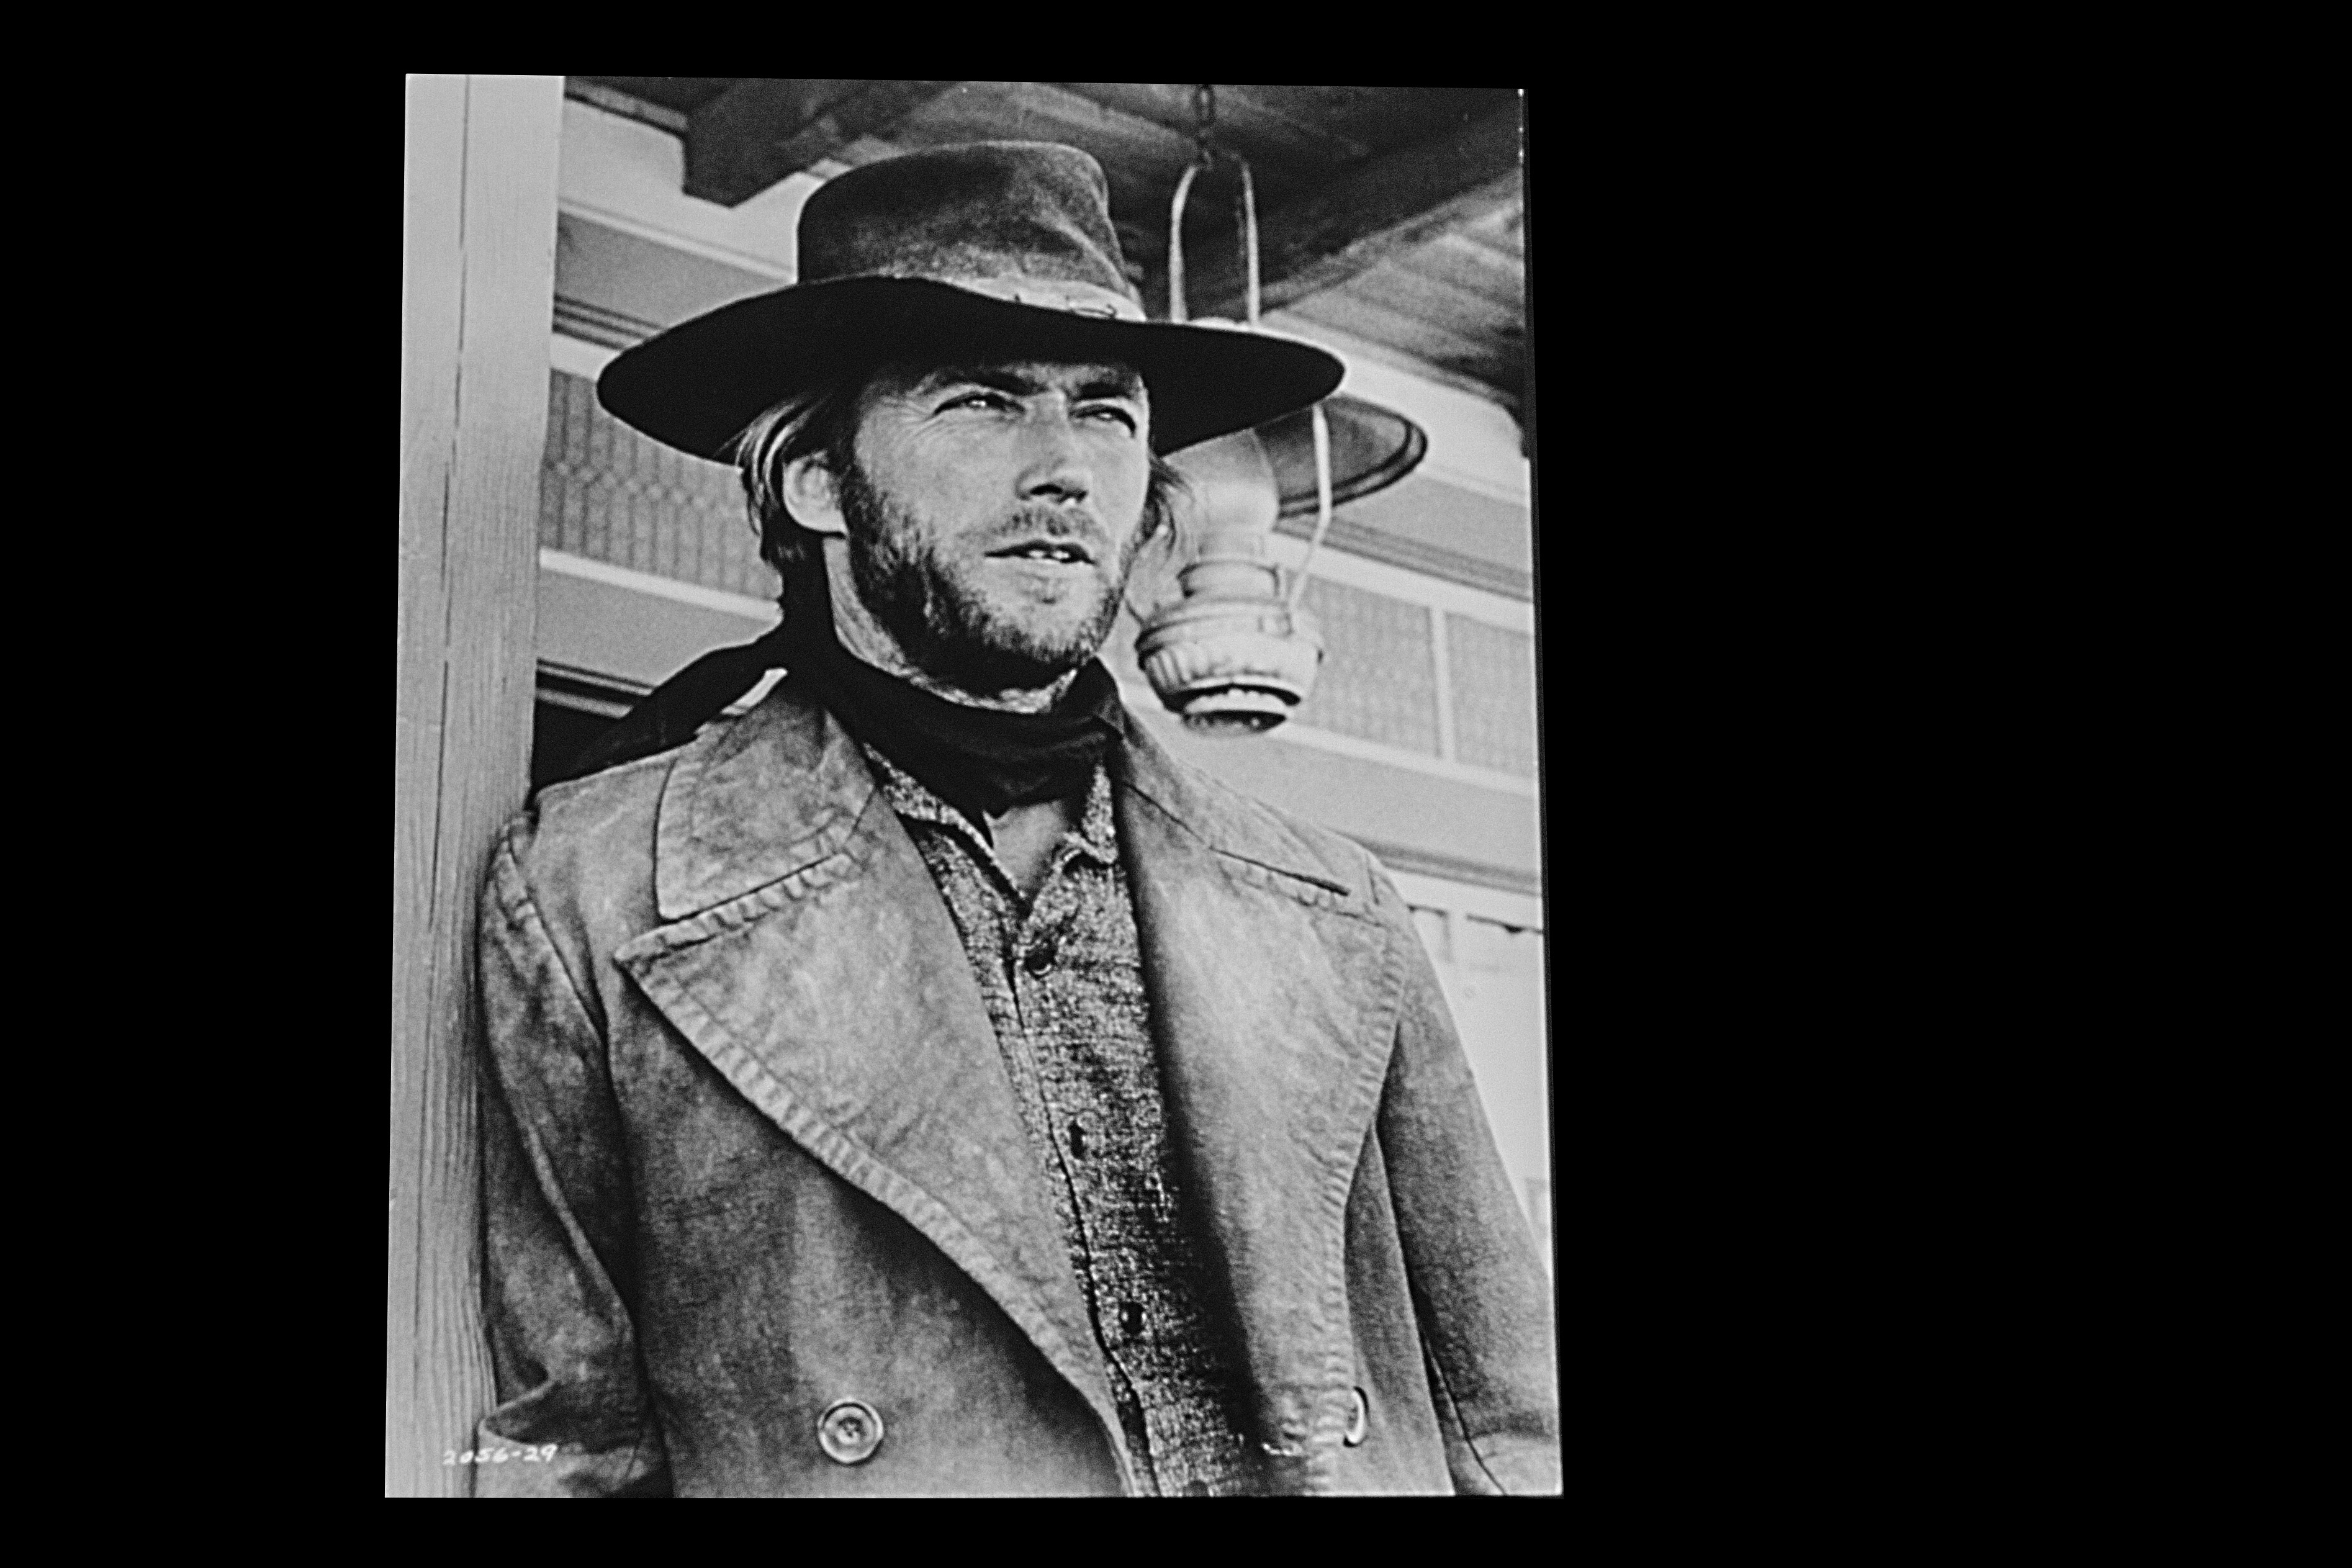 Film Stills and PR Images - Actors: Clint Eastwood (6) and 5 x 4 transparencies from Kelly's